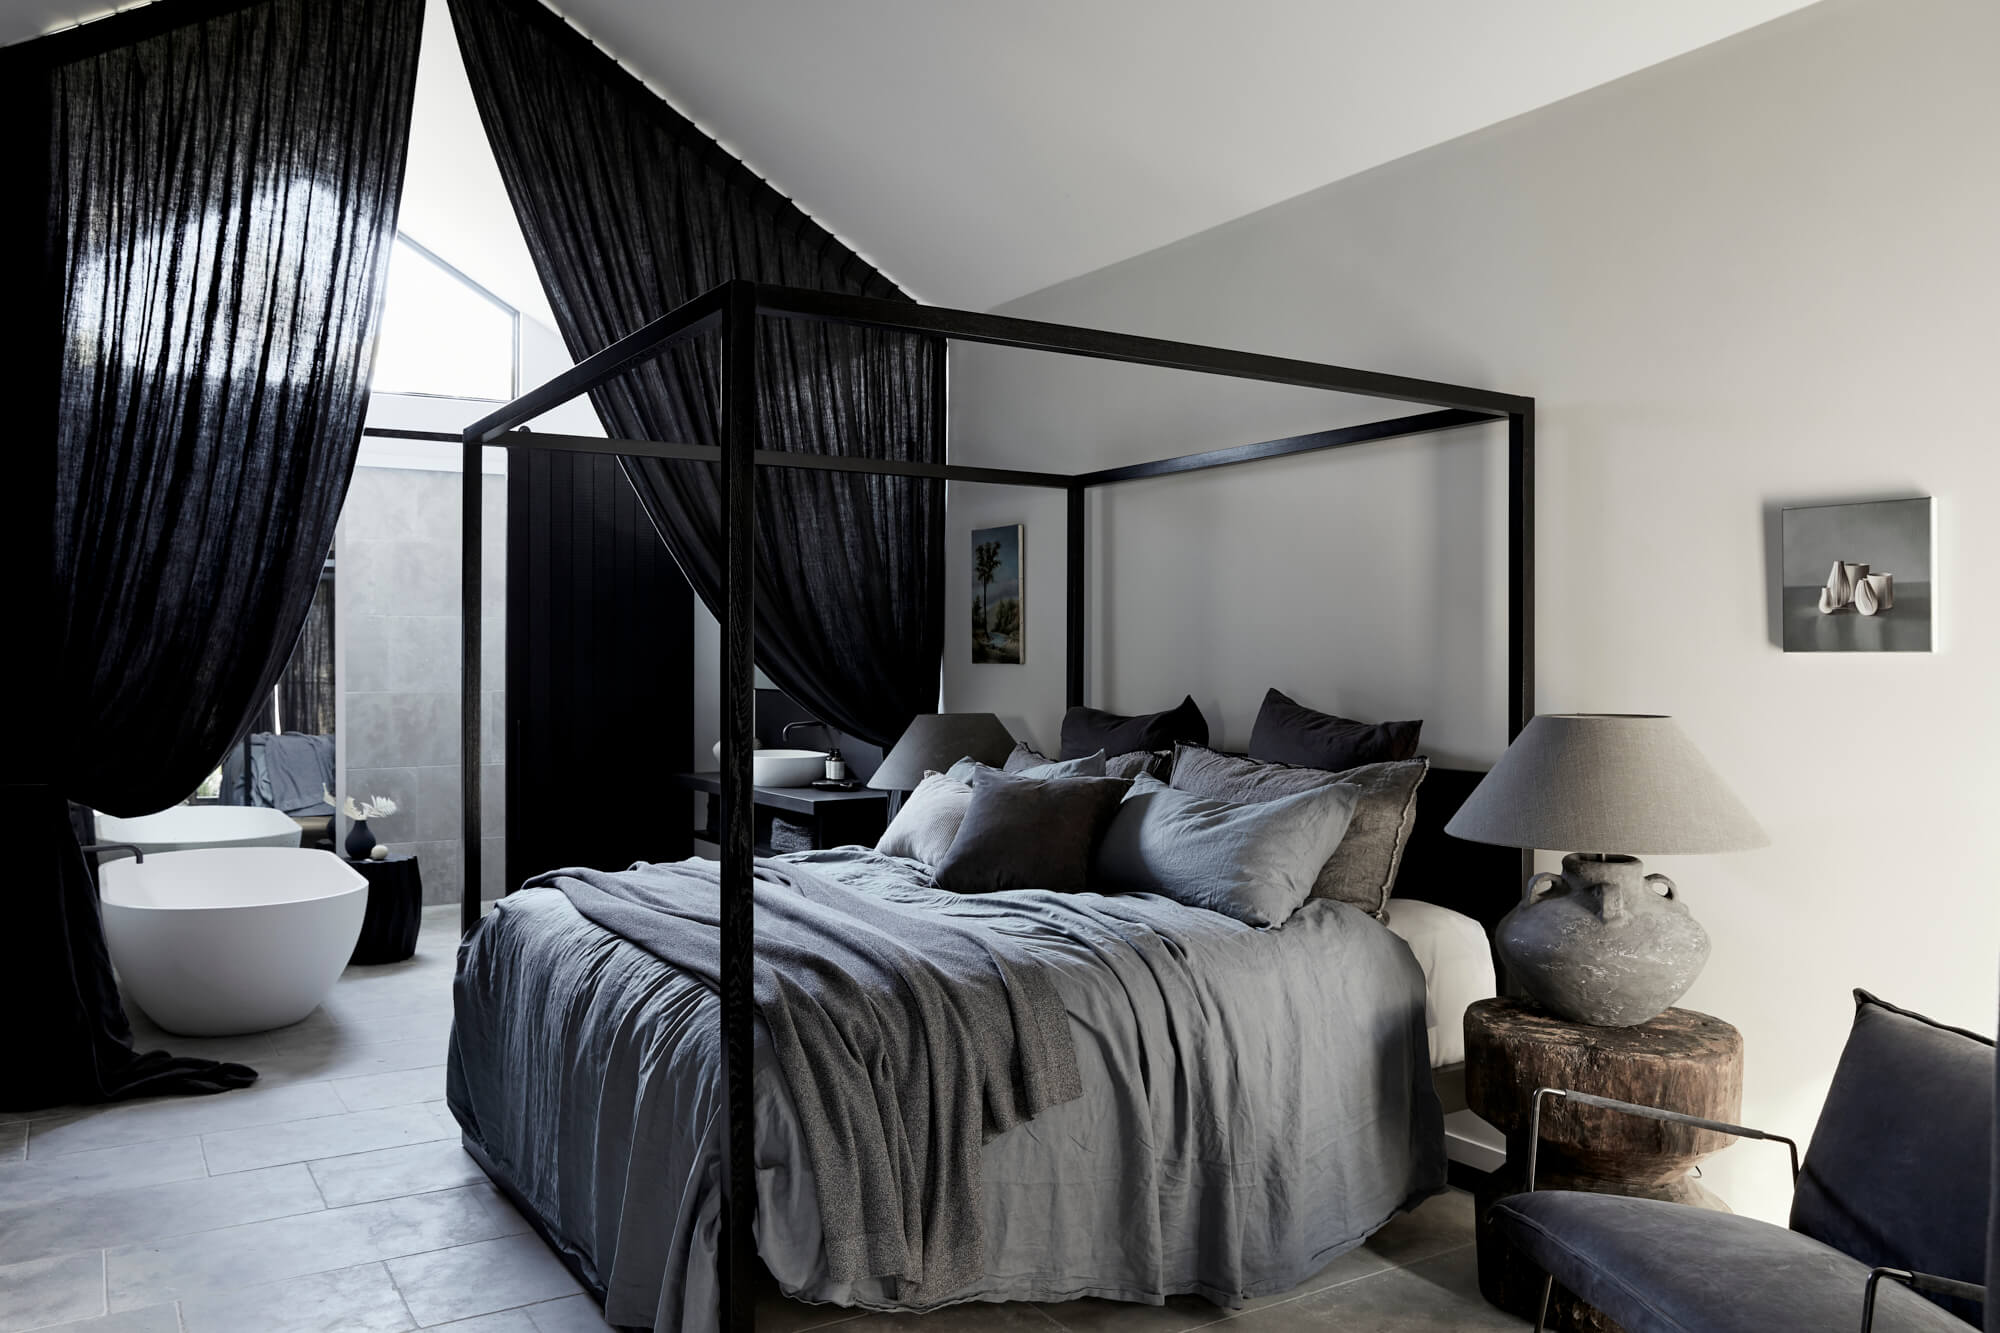 Four-poster bed at the Bower Studios, The Bower Byron Bay hotel